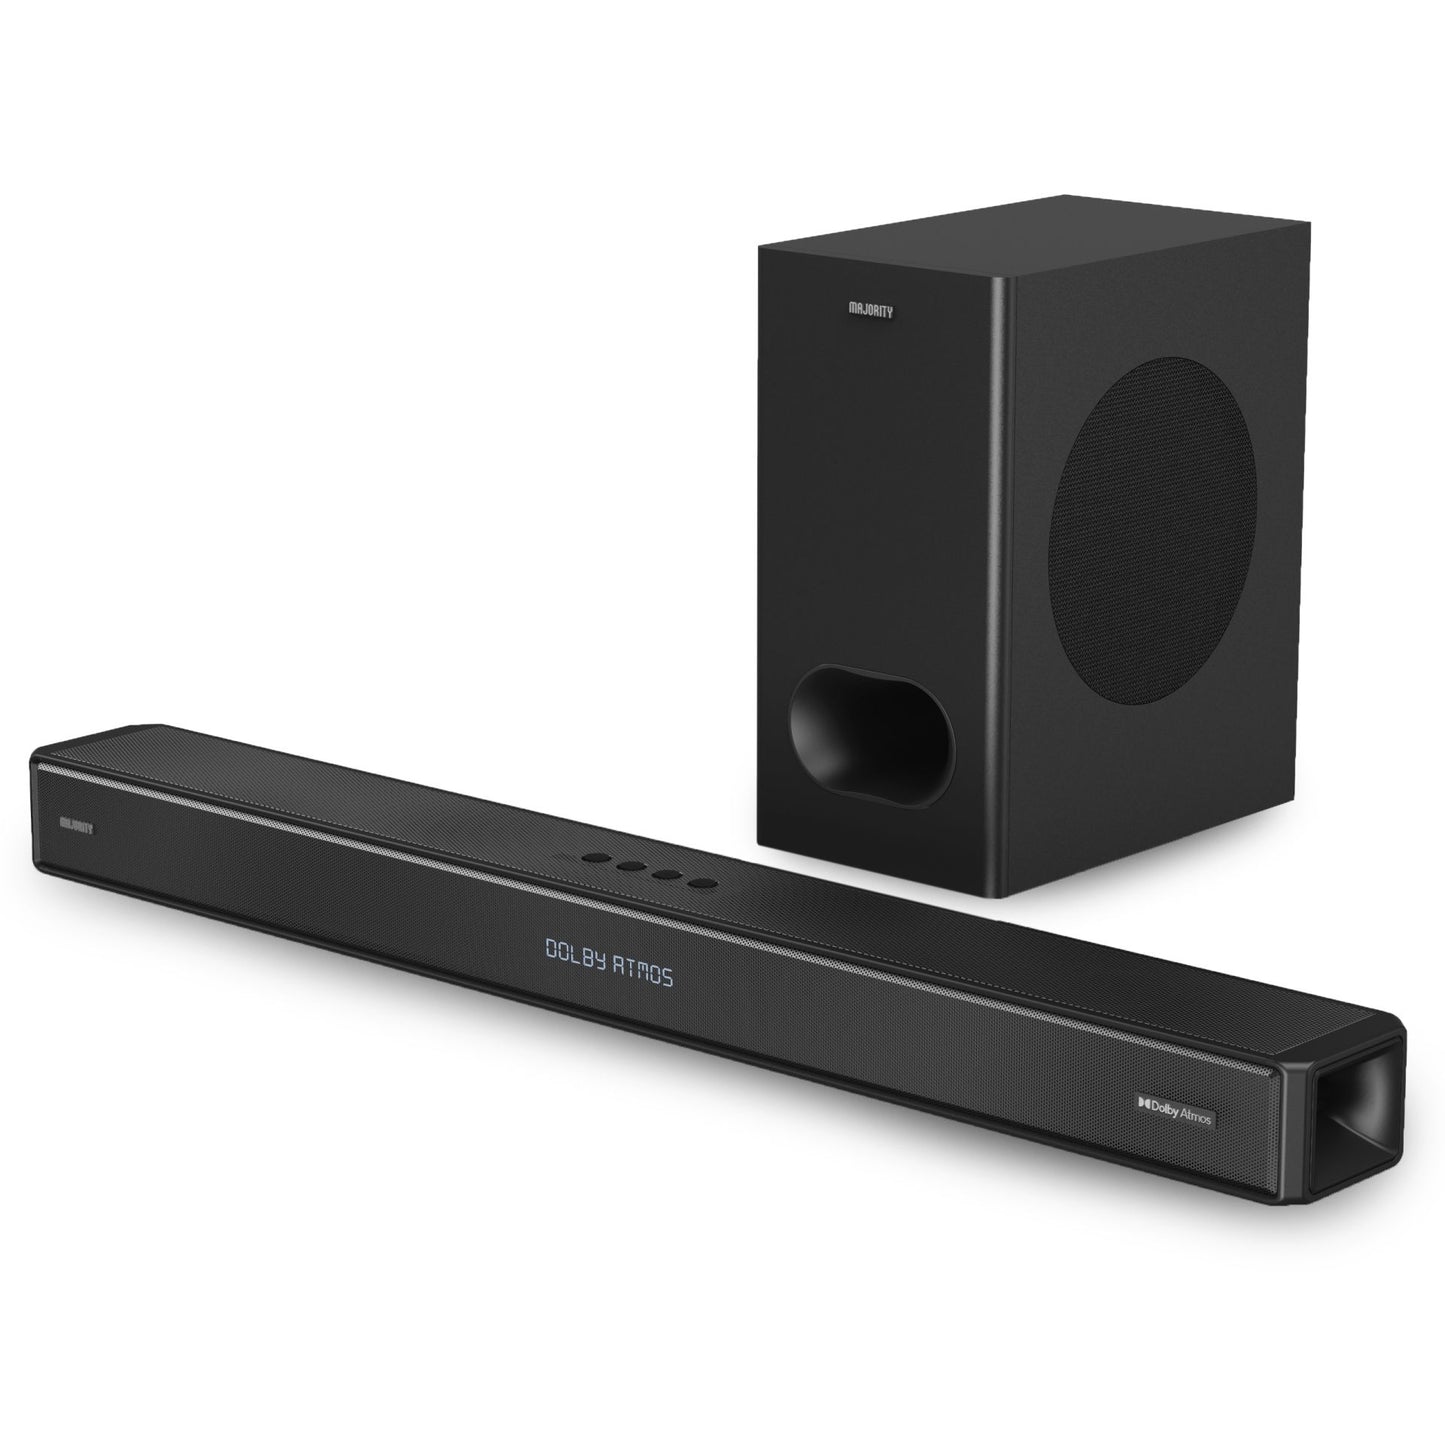 Majority Sierra Plus 2.1.2 Bluetooth TV Soundbar and Subwoofer with Dolby Atmos Sound System Black 2.1.2 channels 400 W